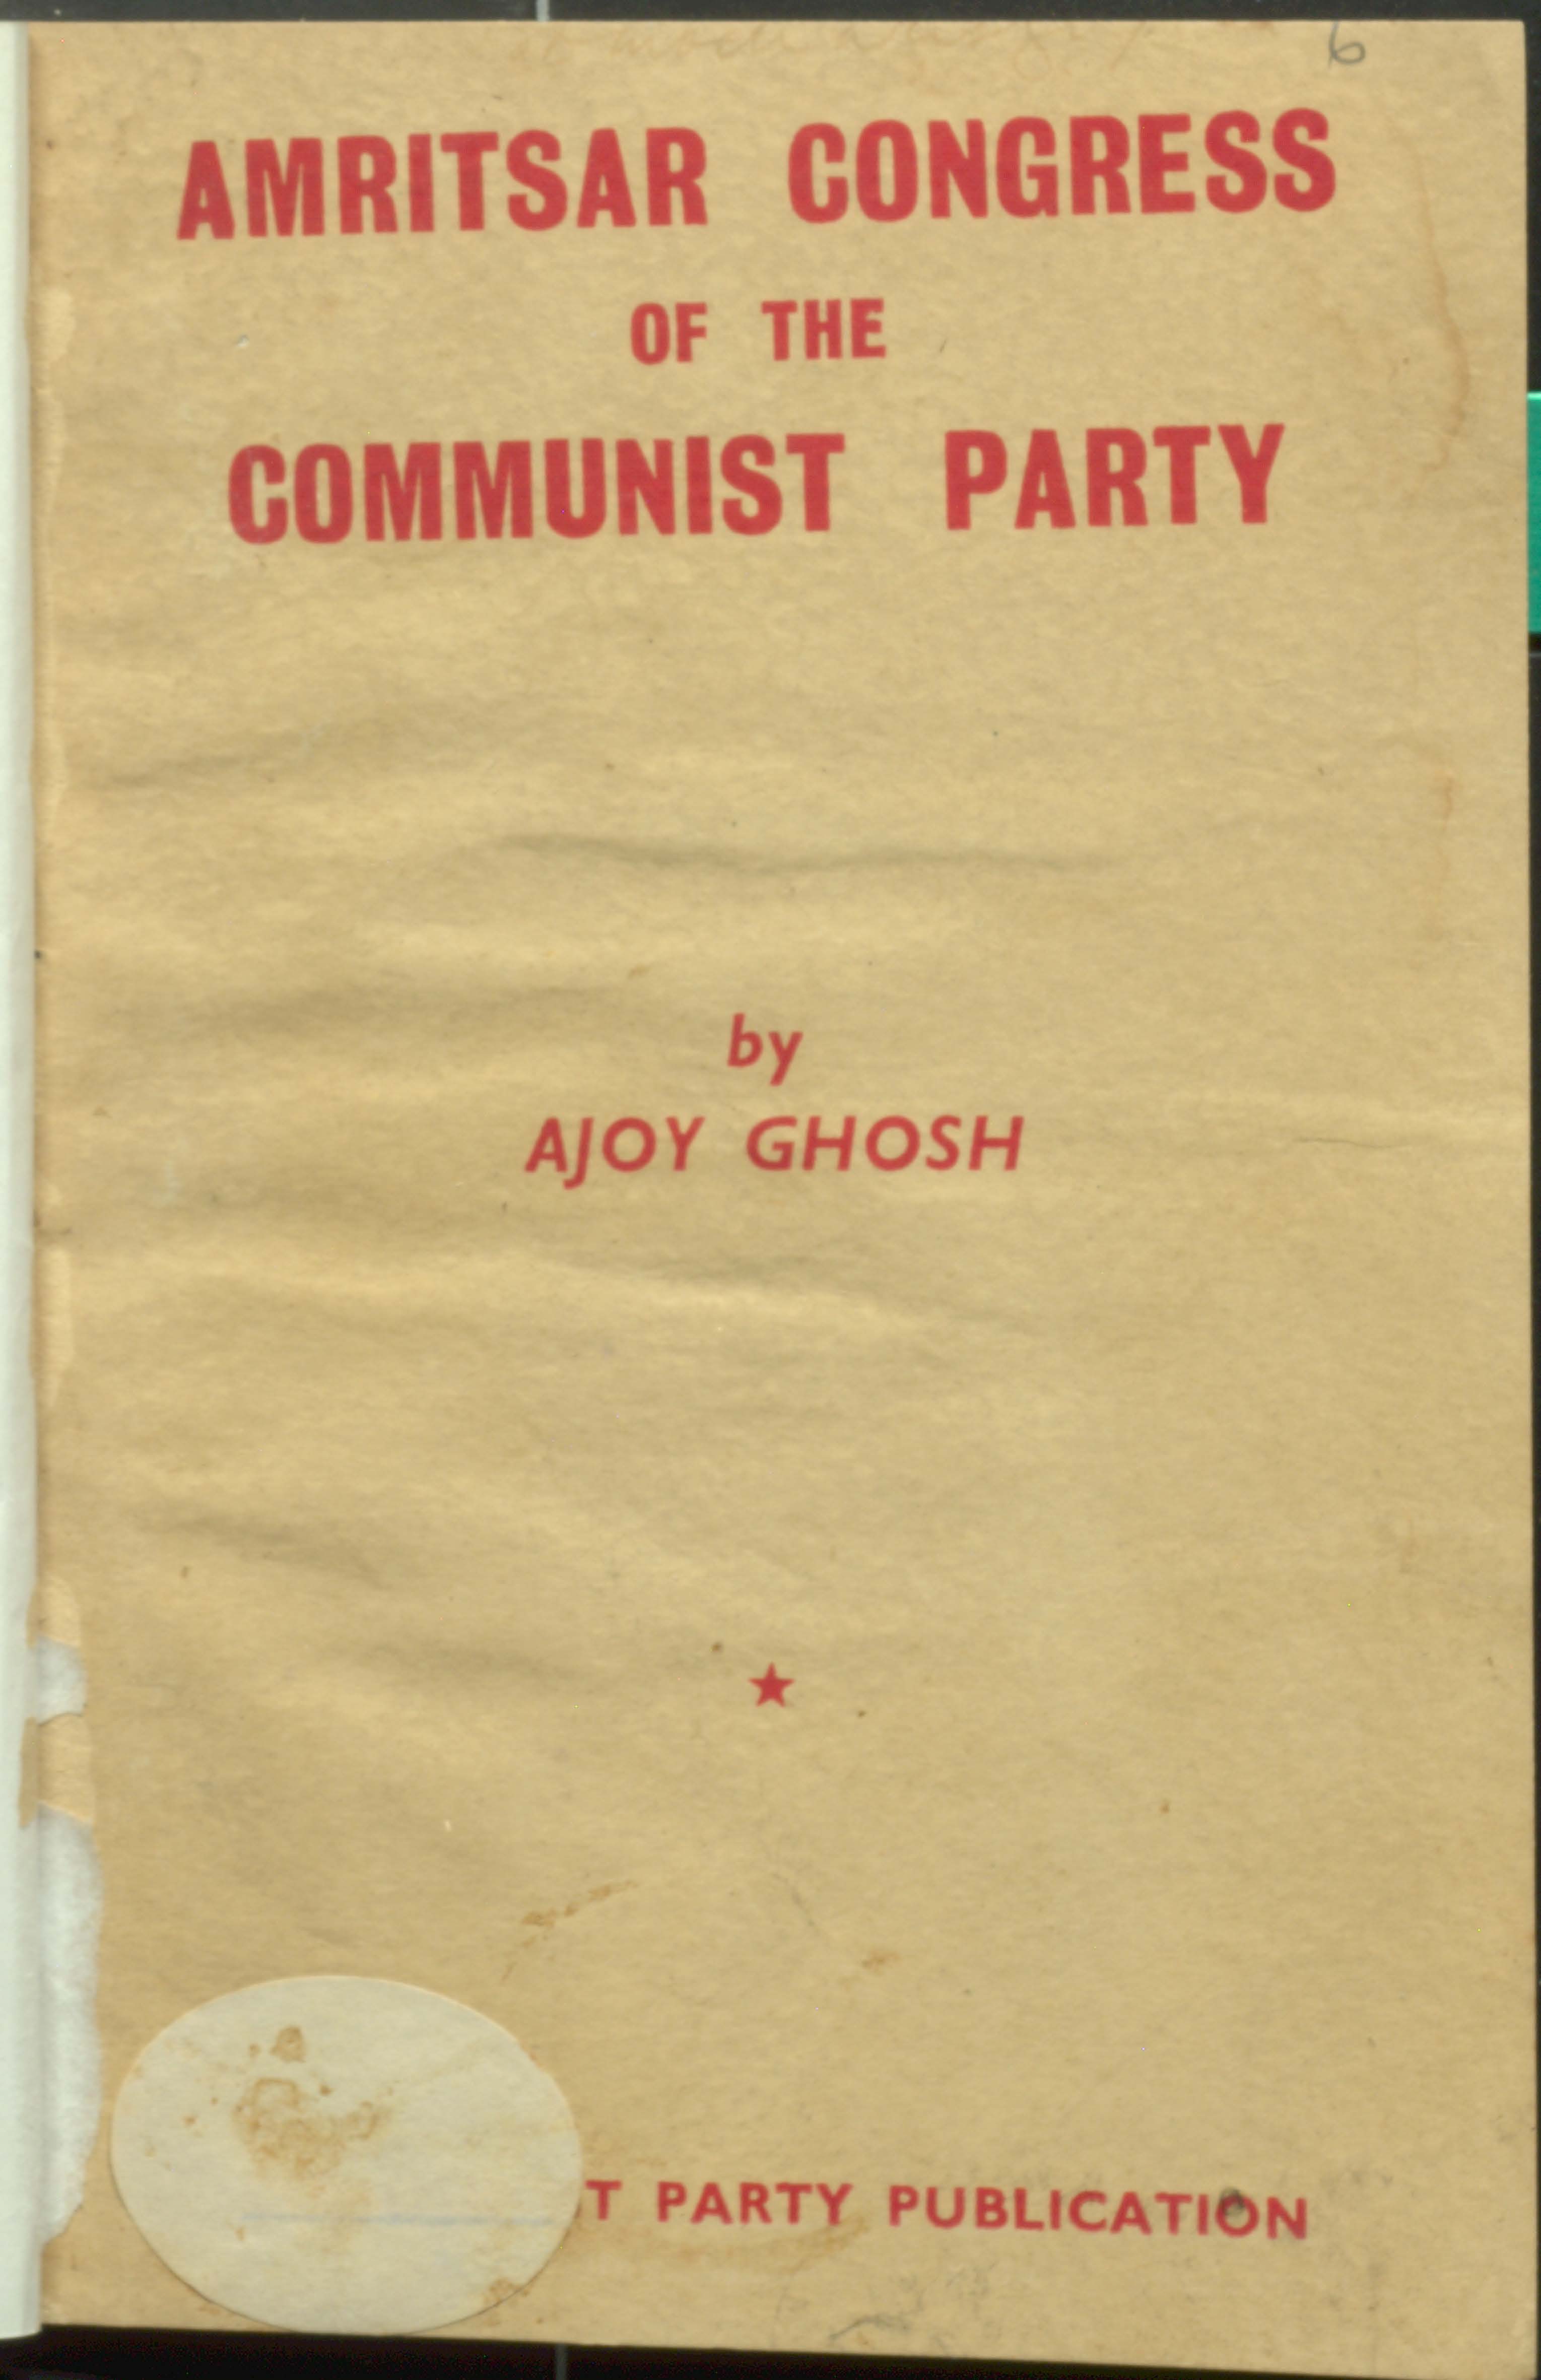 Amritsar Congress of the Communist Party